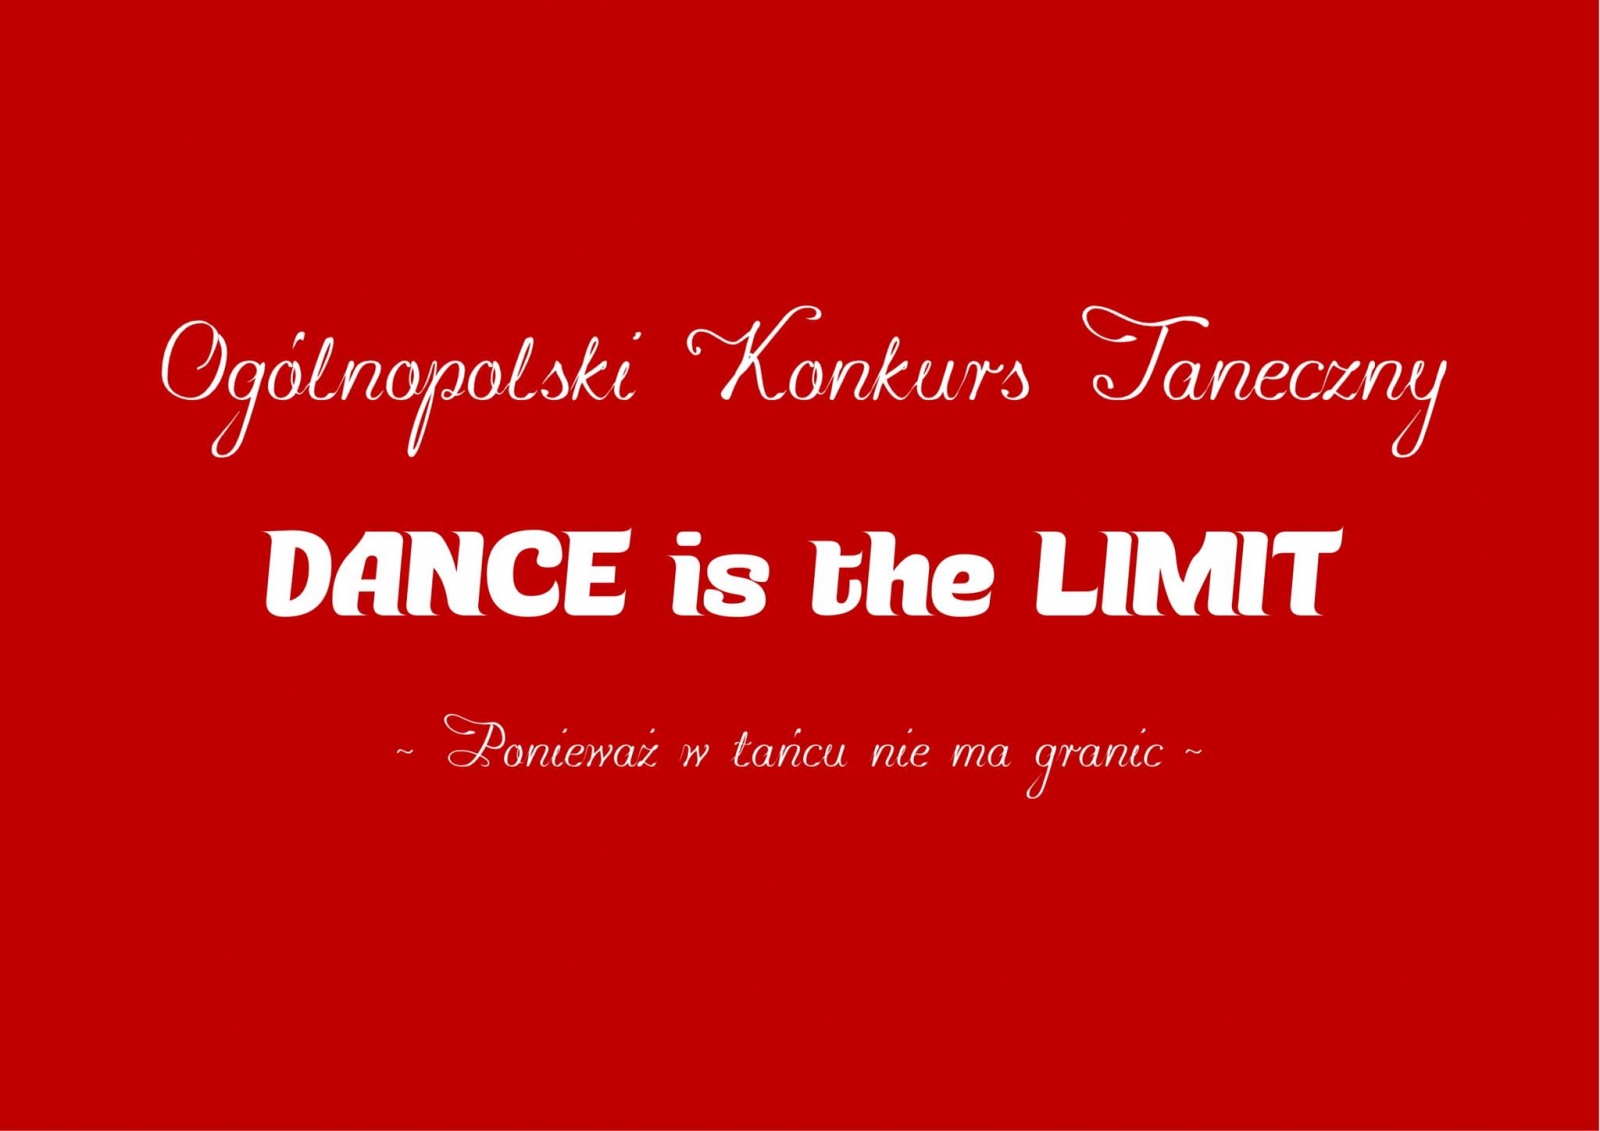 Dance is the Limit 2019 poster